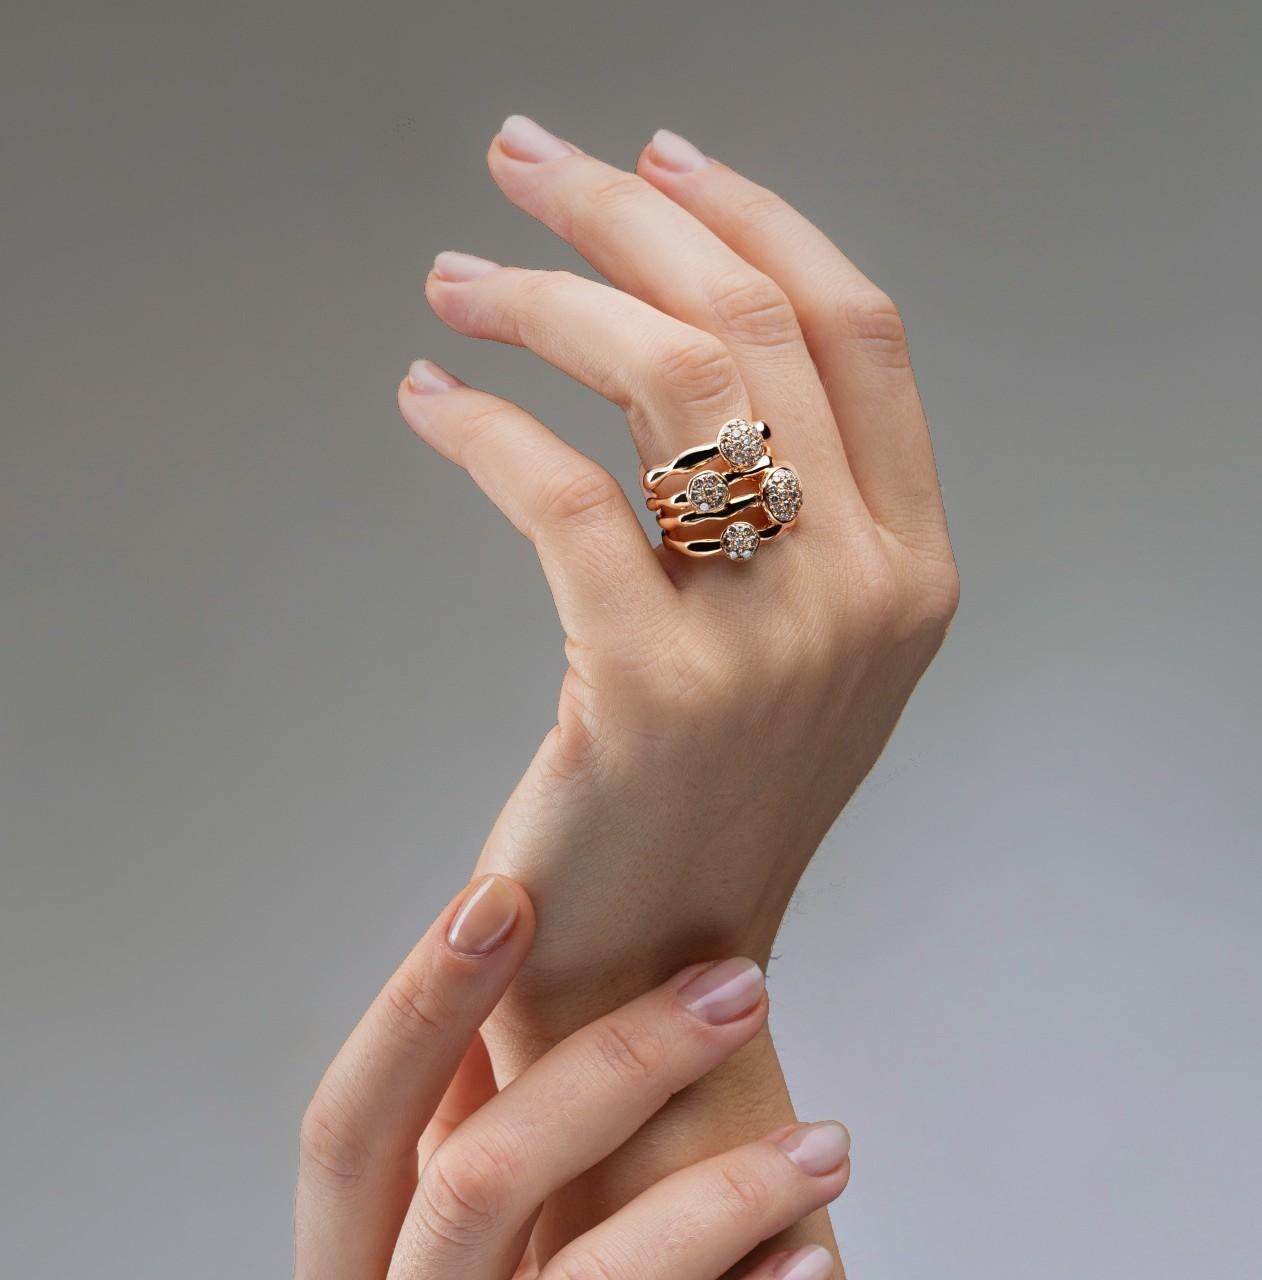 This spectacularly designed ring by Alex Jona features four 18 karat rose gold organic shaped bands forged together and accented with irregularly placed diamond pavé buttons featuring 53 brown diamonds weighing 1.09 carats.
Hand crafted in Italy,